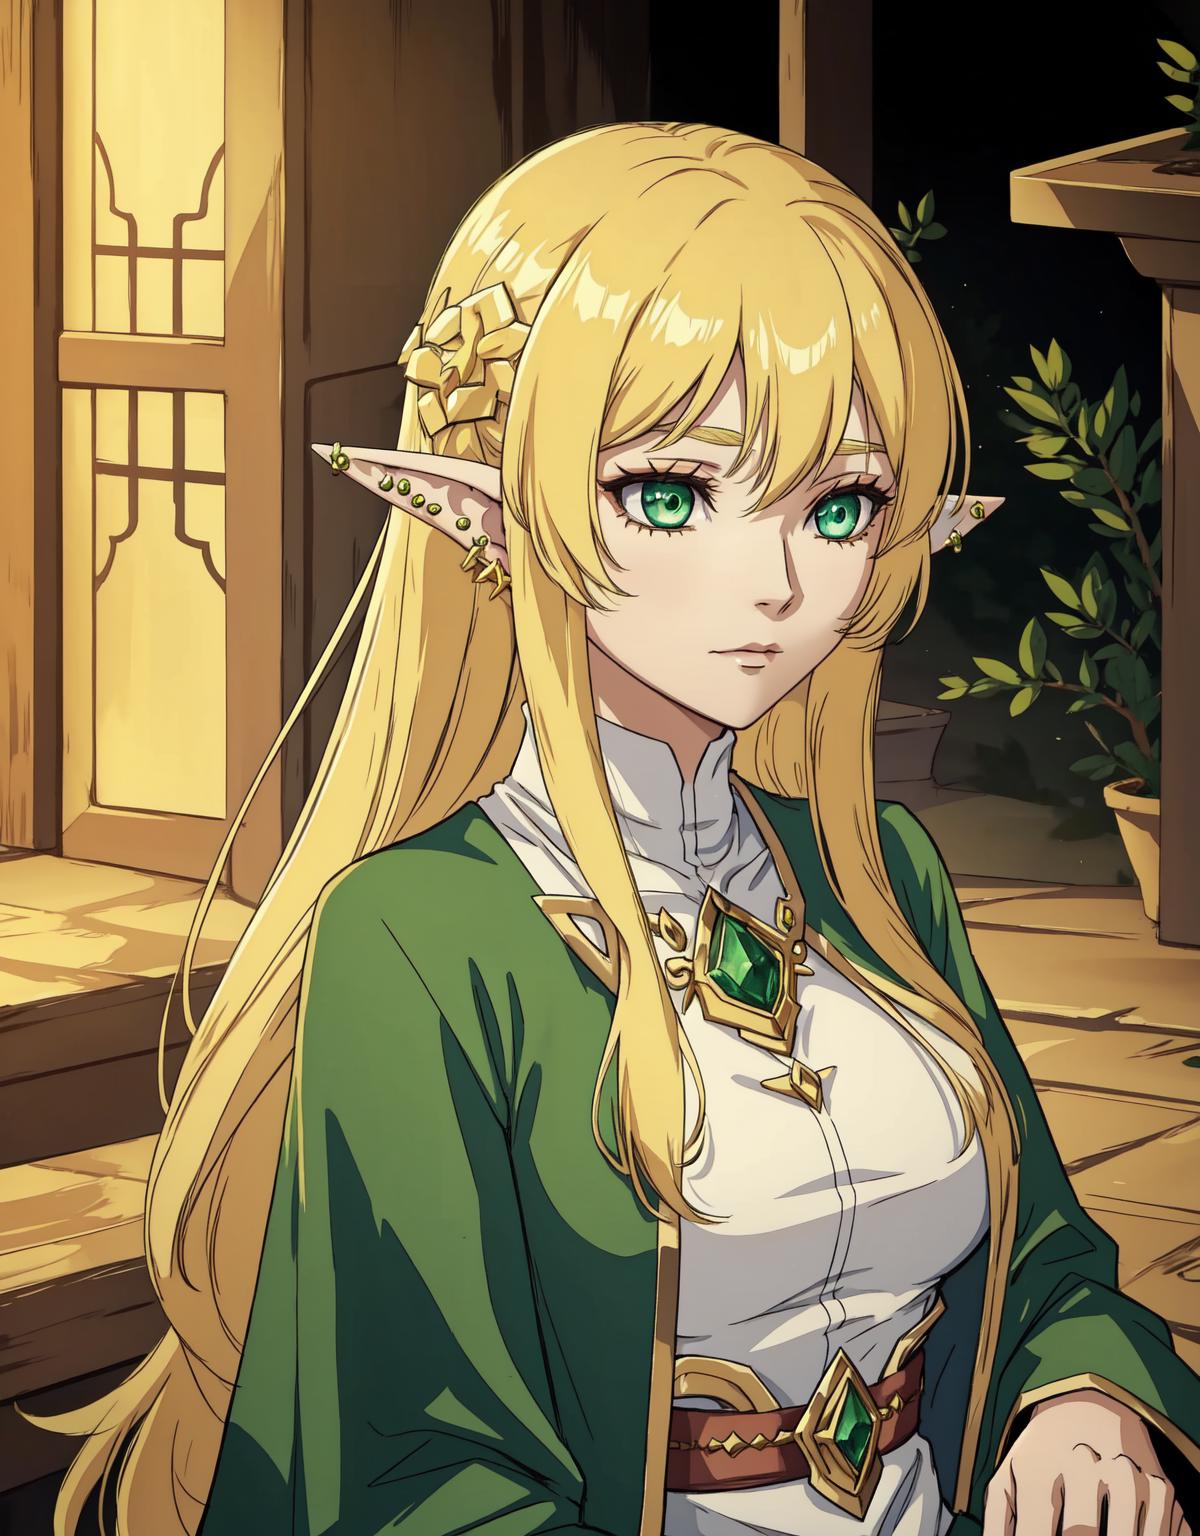 Anime-style image of a beautiful elf woman with long blonde hair and green eyes, wearing a green and white dress and standing in front of a door.